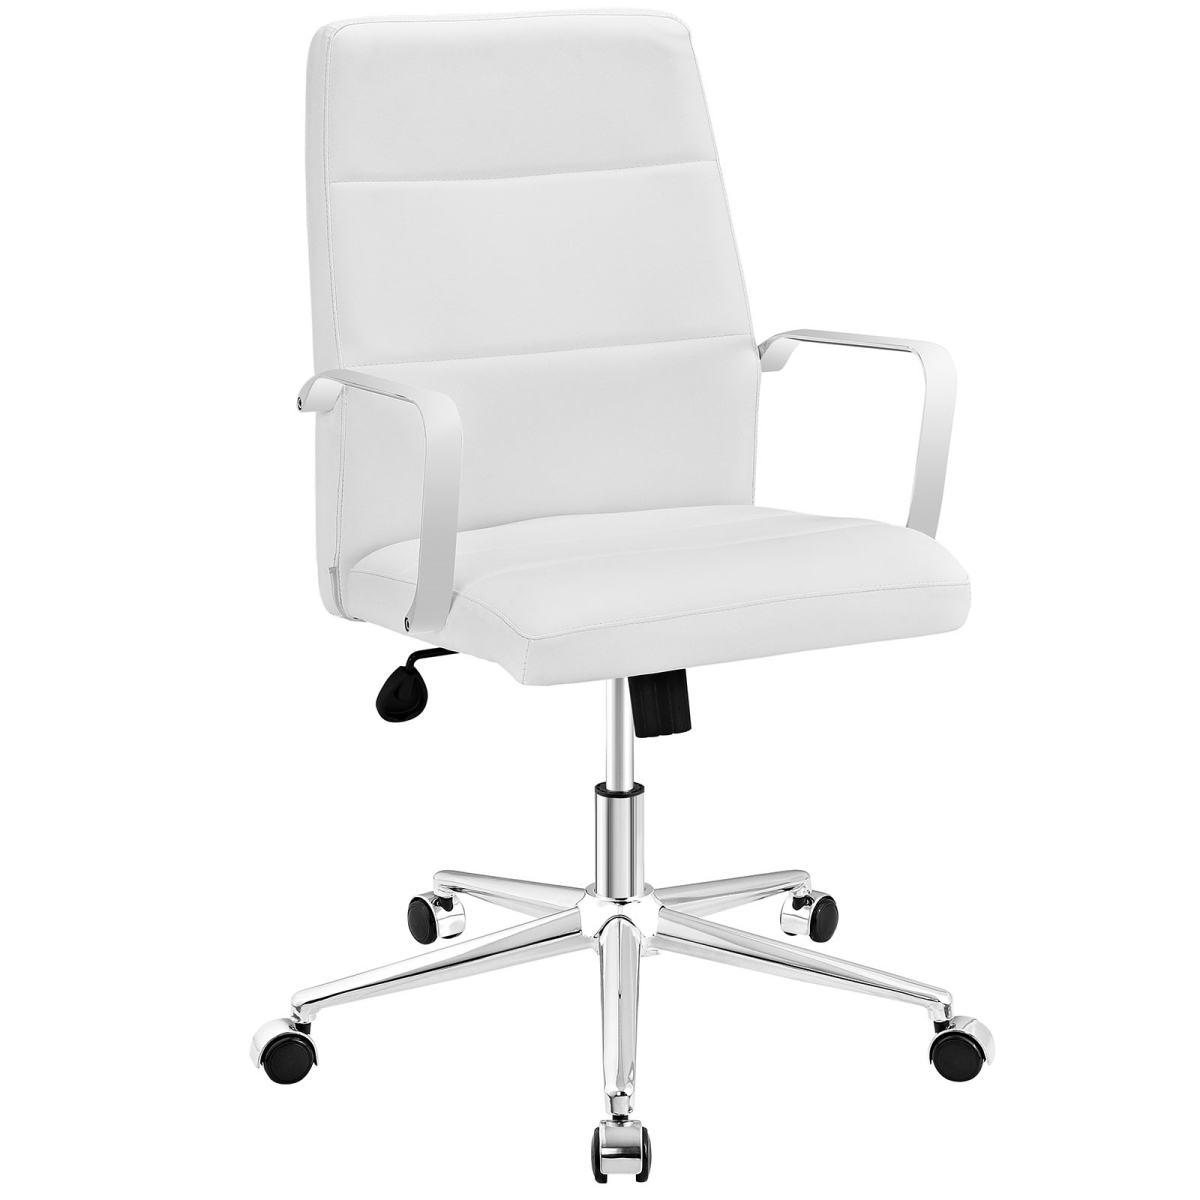 Modway Eei-2121-whi Stride Mid Back Office Chair, White